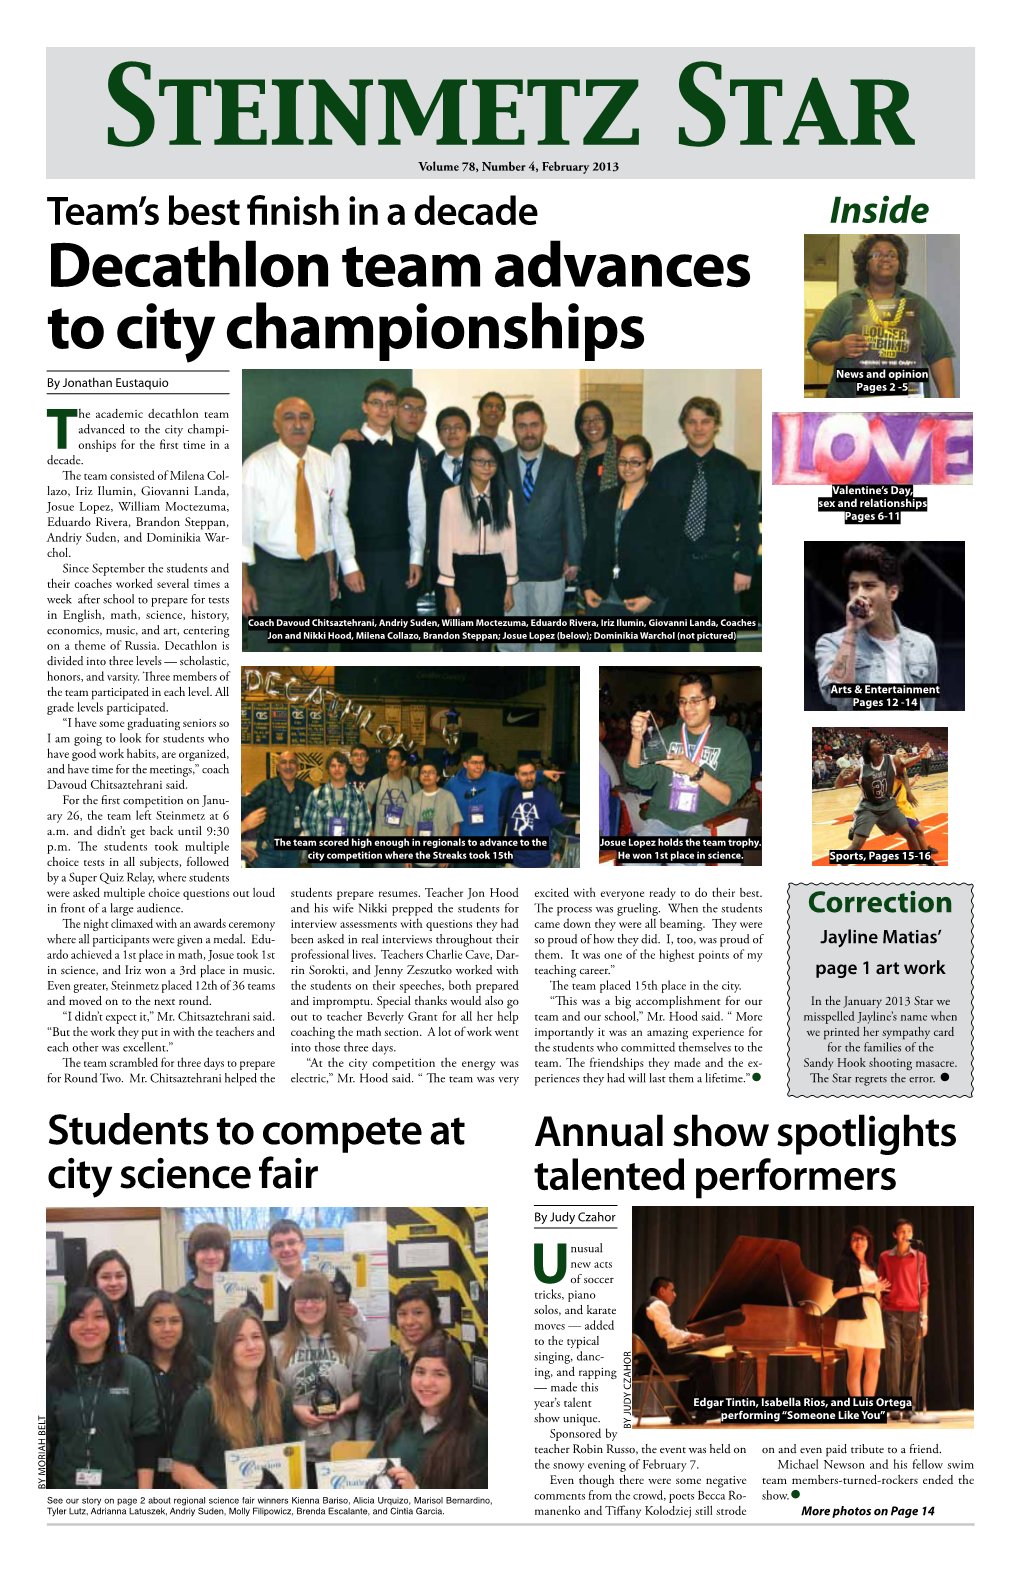 Decathlon Team Advances to City Championships News and Opinion by Jonathan Eustaquio Pages 2 -5